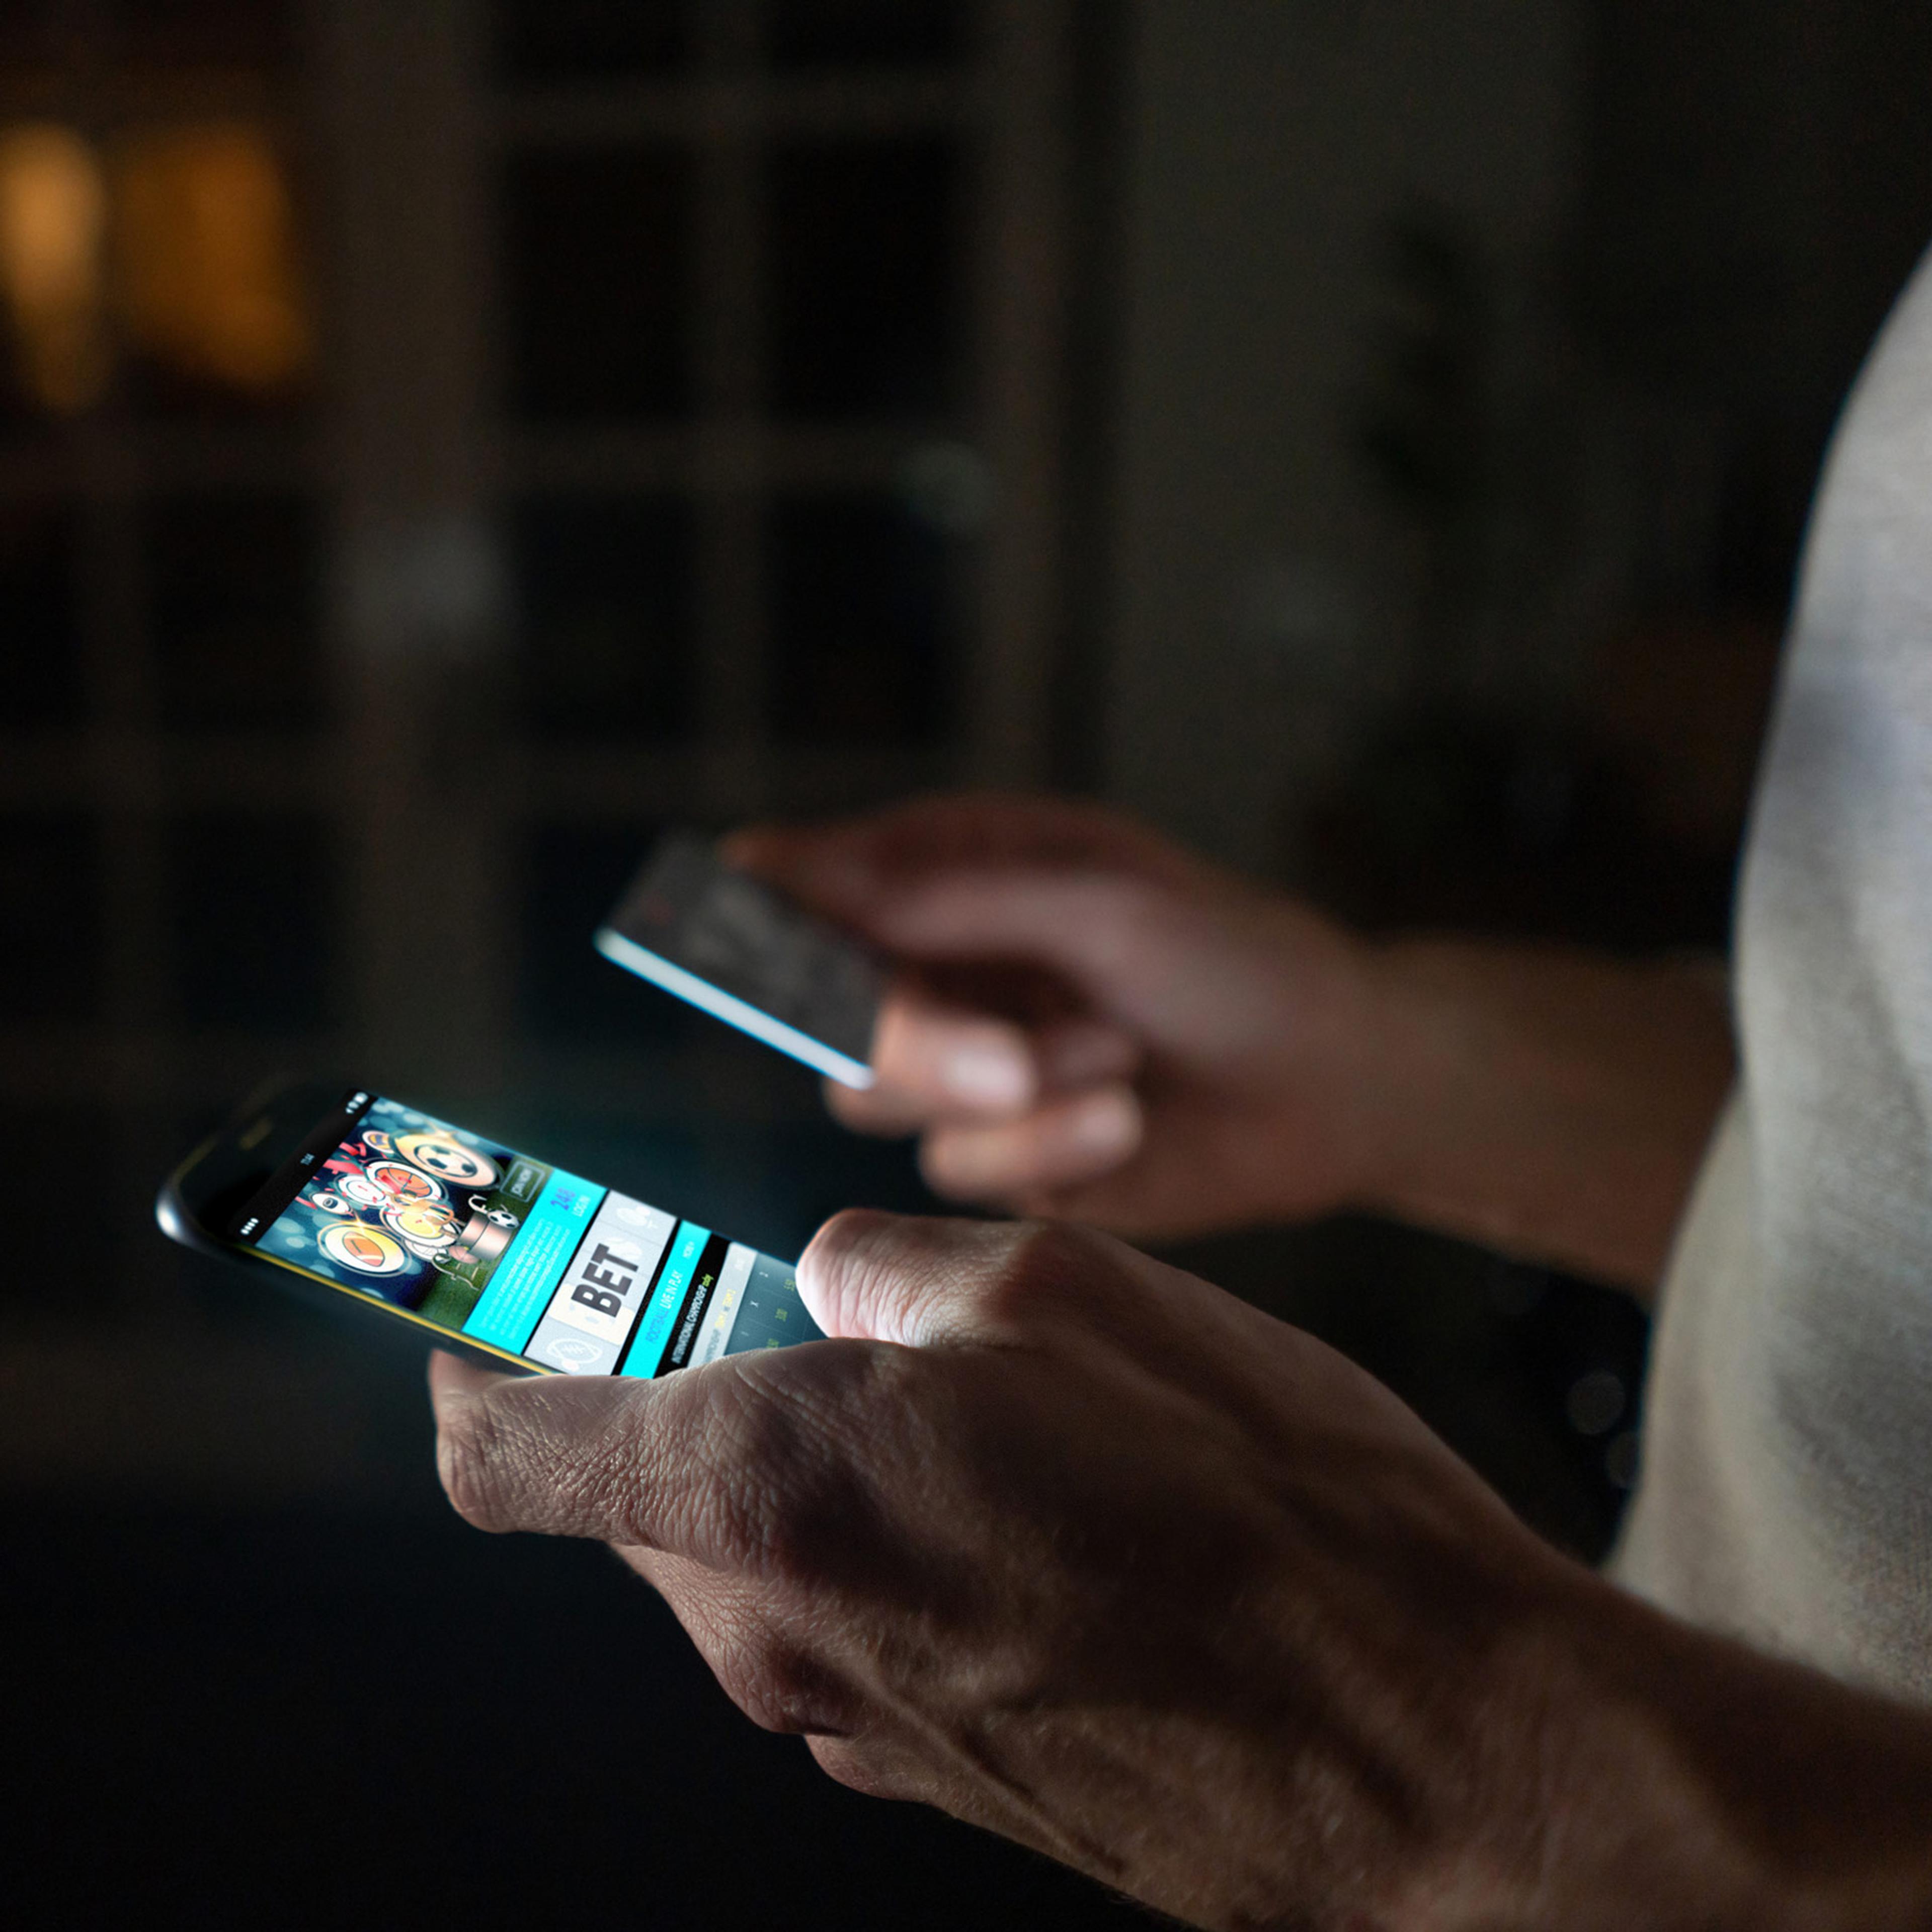 A close-up of a man using an online betting platform on his smartphone. The phone screen lights up a darkened room